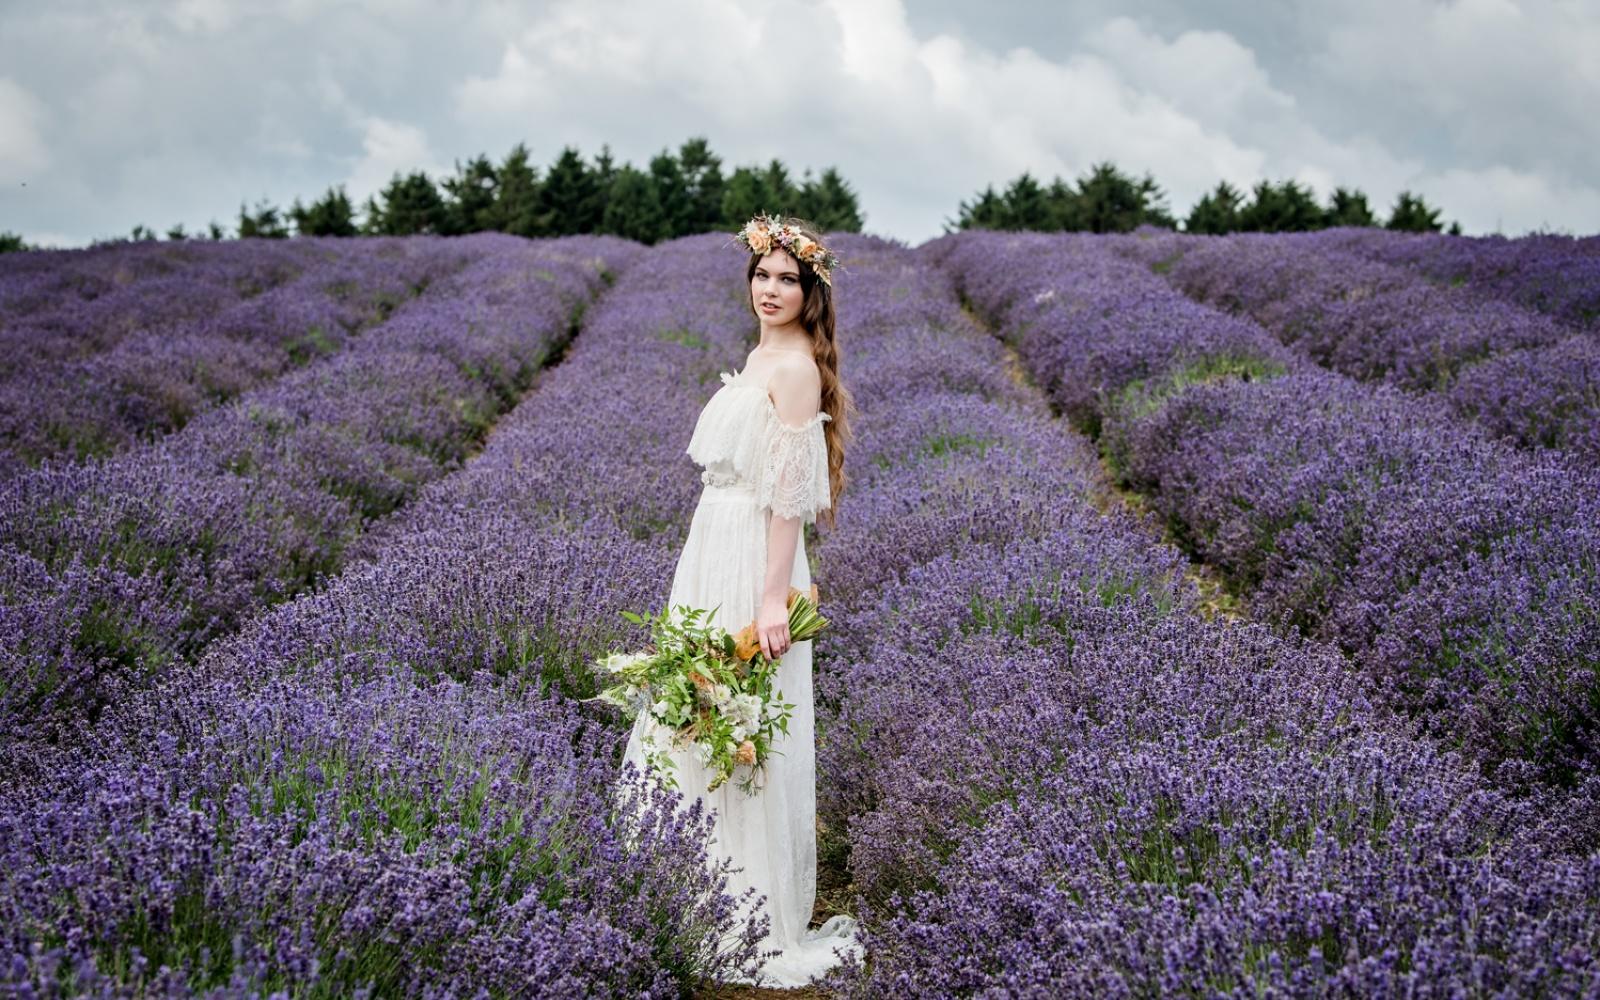 Styled Shoot ideas inspiration Capture Every Moment Make Up by Carissa Wendy House Flowers Willoughby Wolf lavender fields Snowshill Becky Pinker model